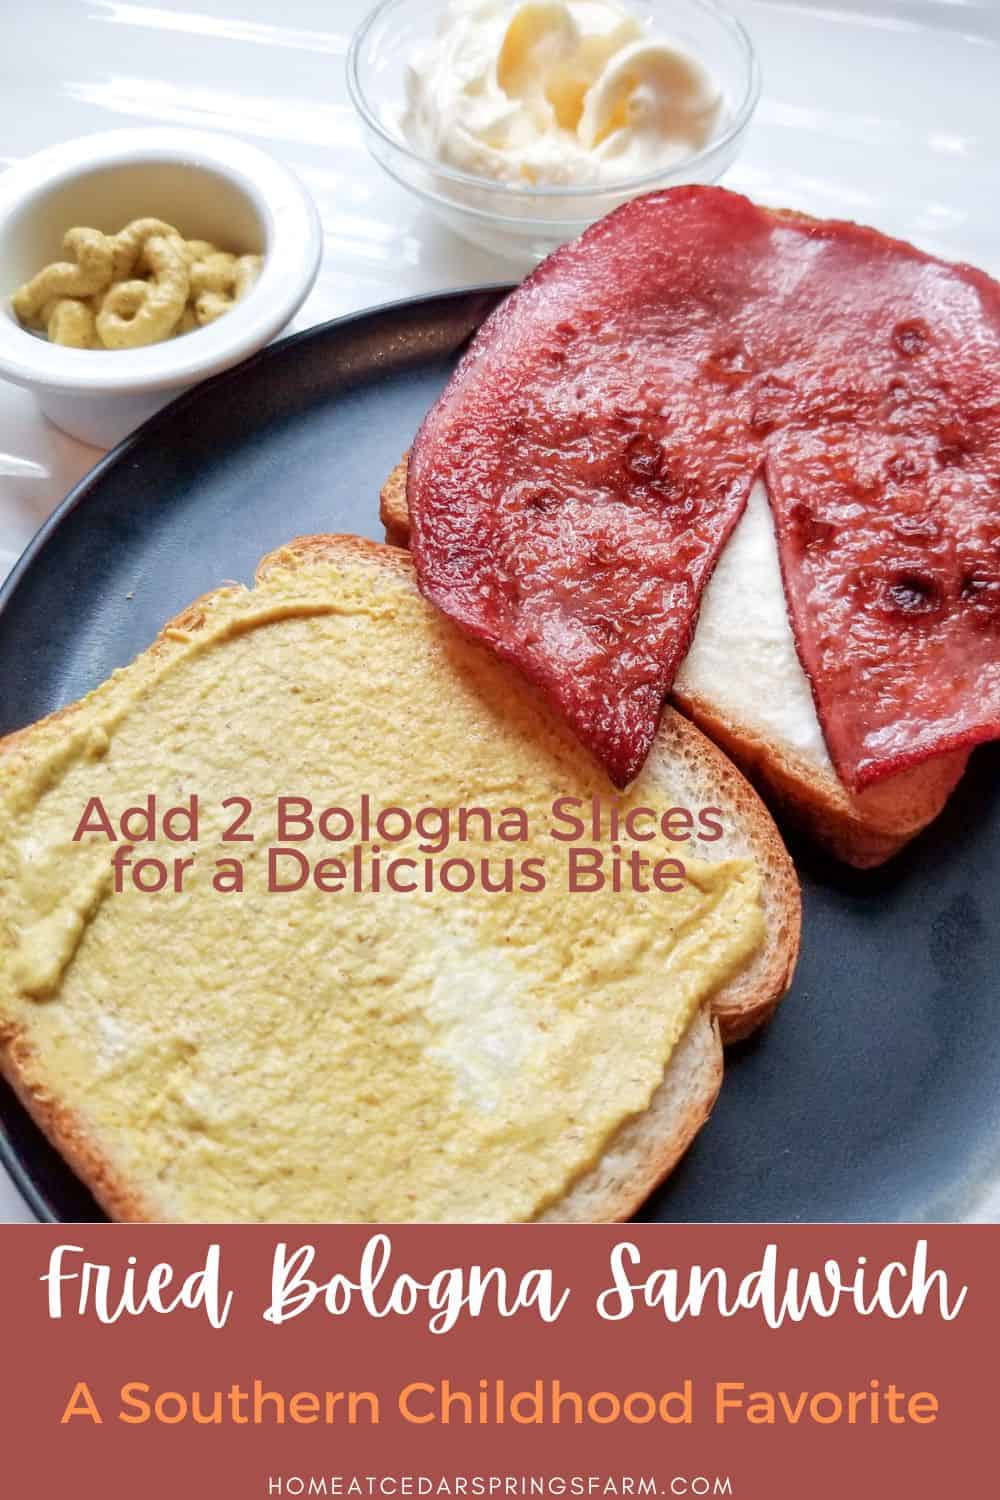 Classic fried bologna sandwich on white bread with mustard and mayonnaise. Text overlay.